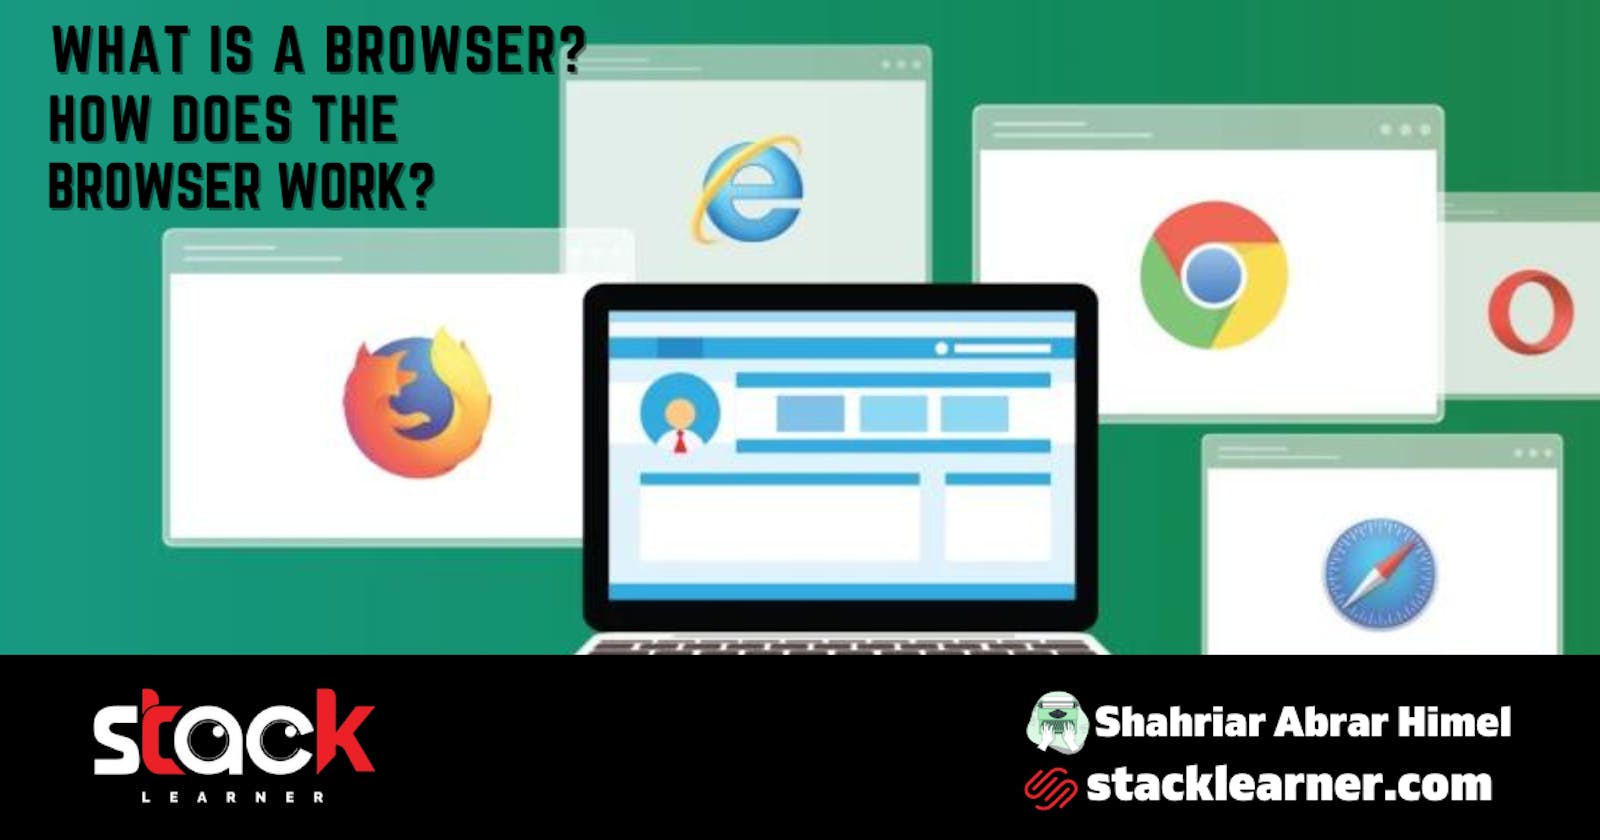 What is a browser? How does the browser work?